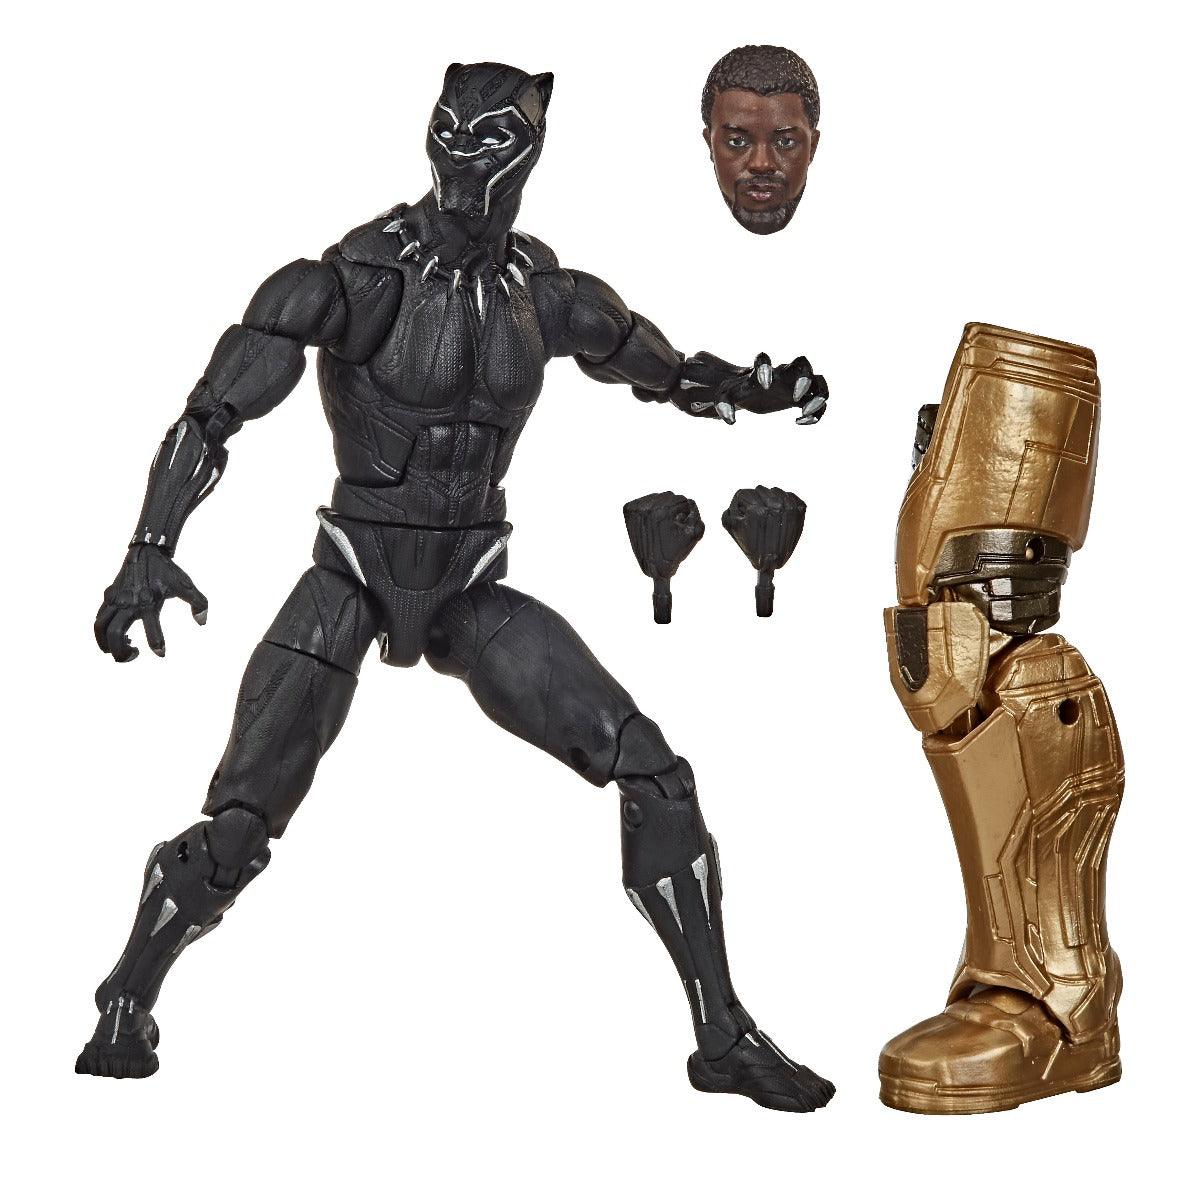 Hasbro Marvel Legends Series Avengers 6-inch Collectible Action Figure Toy Black Panther, Premium Design and 3 Accessories